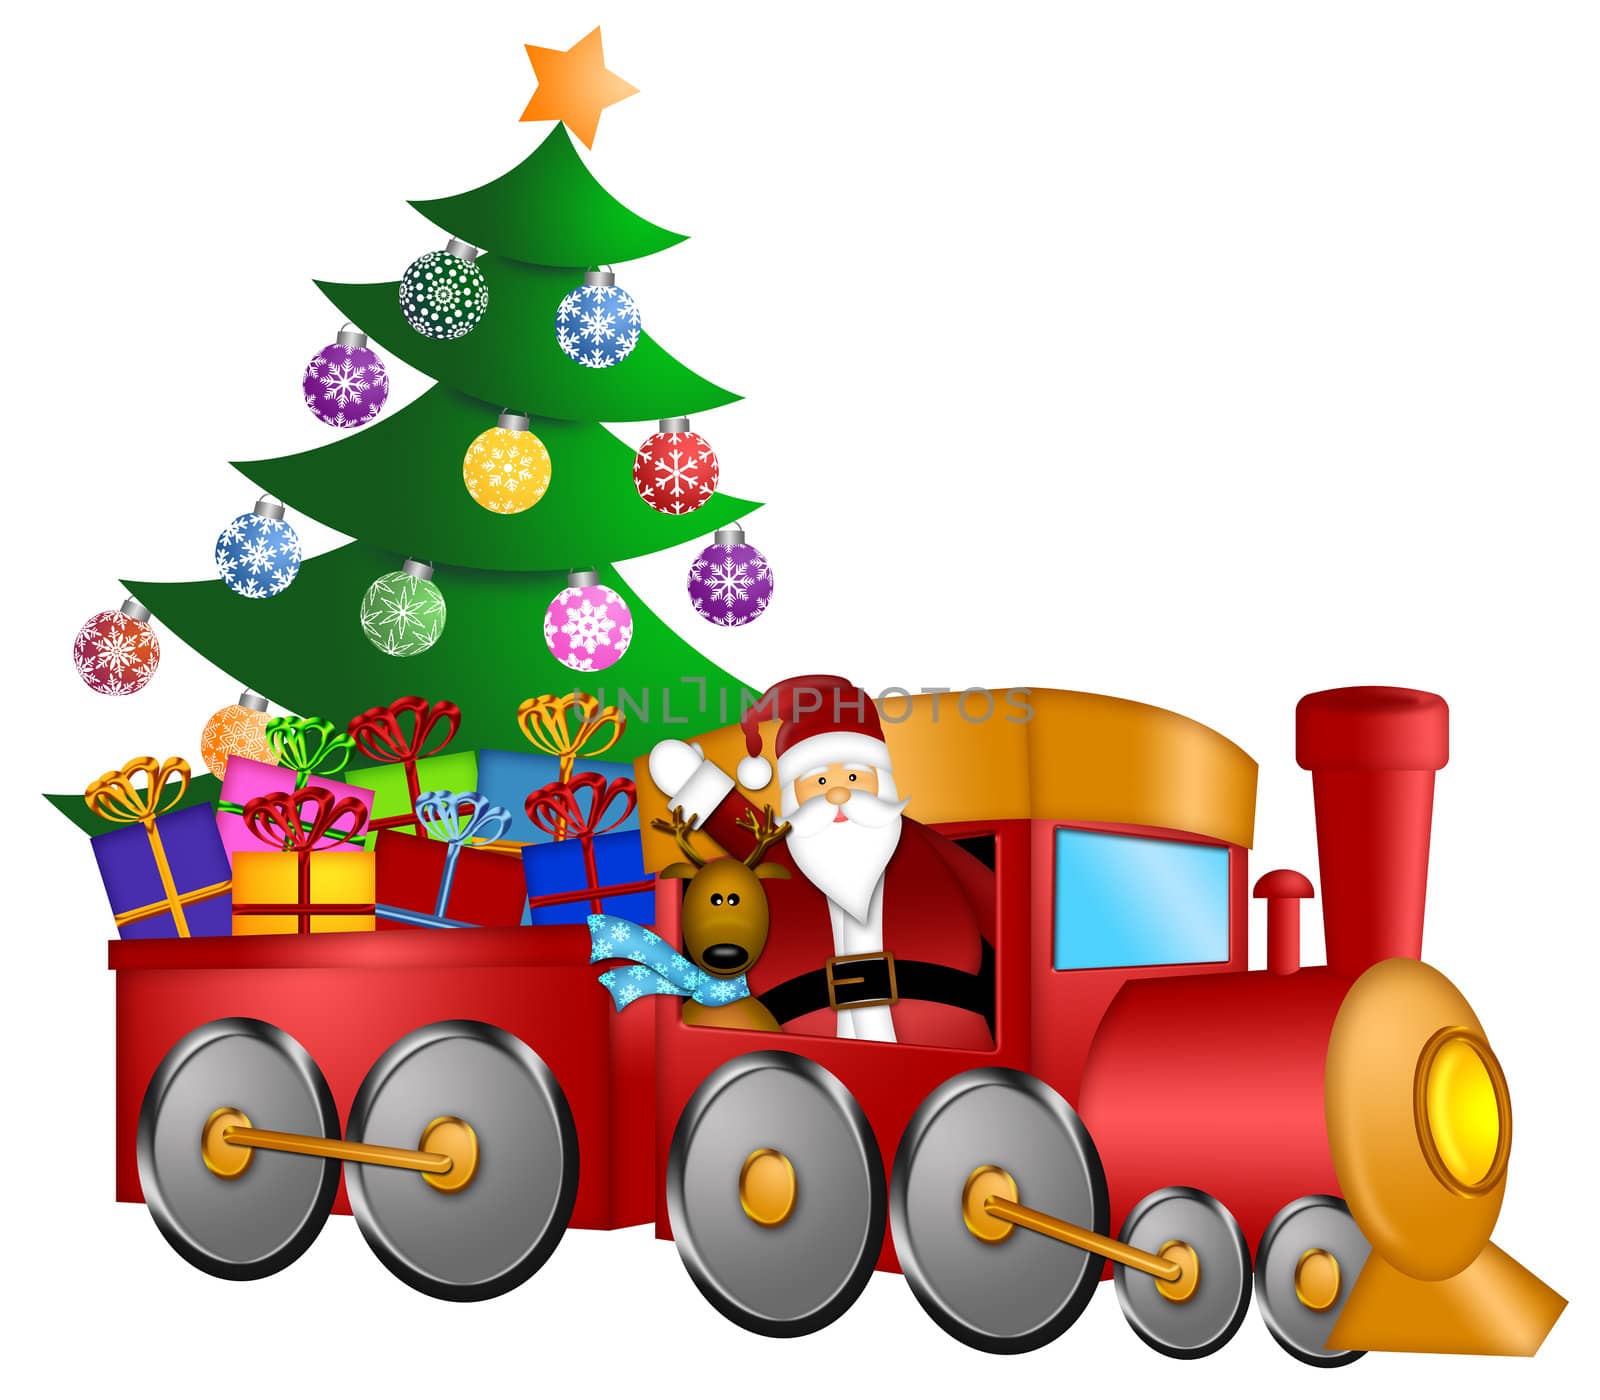 Santa Claus and Reindeer Delivering Gifts in Red Train with Christmas Tree Illustration